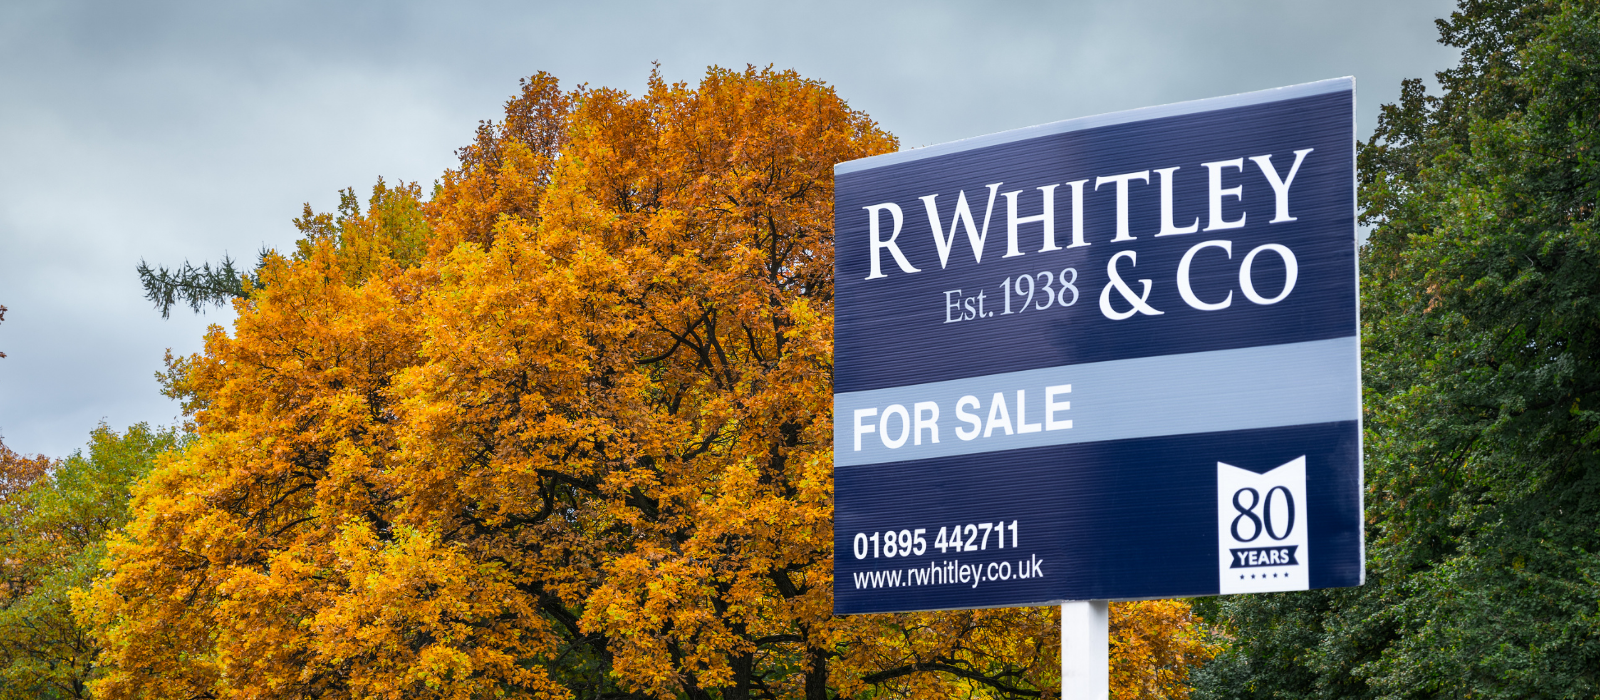 Things to Consider When Selling A Buy-to-Let Property